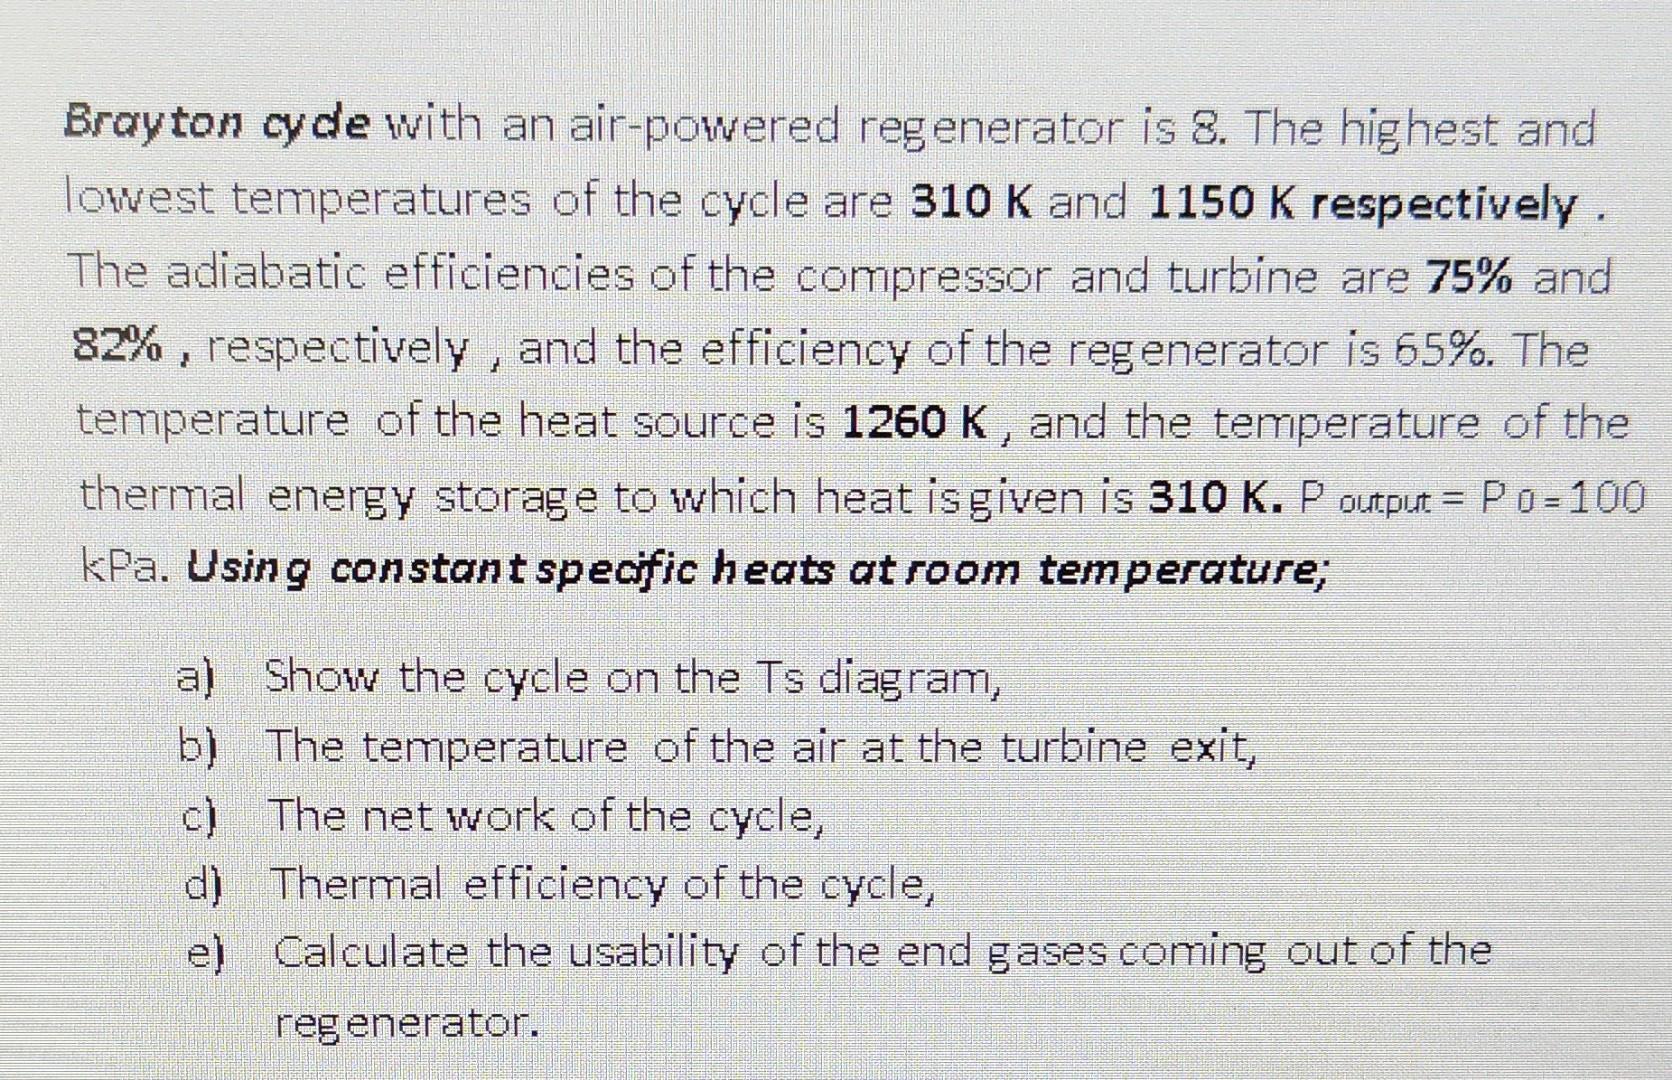 Brayton cyde with an air-powered regenerator is 8. The highest and lowest temperatures of the cycle are 310 K